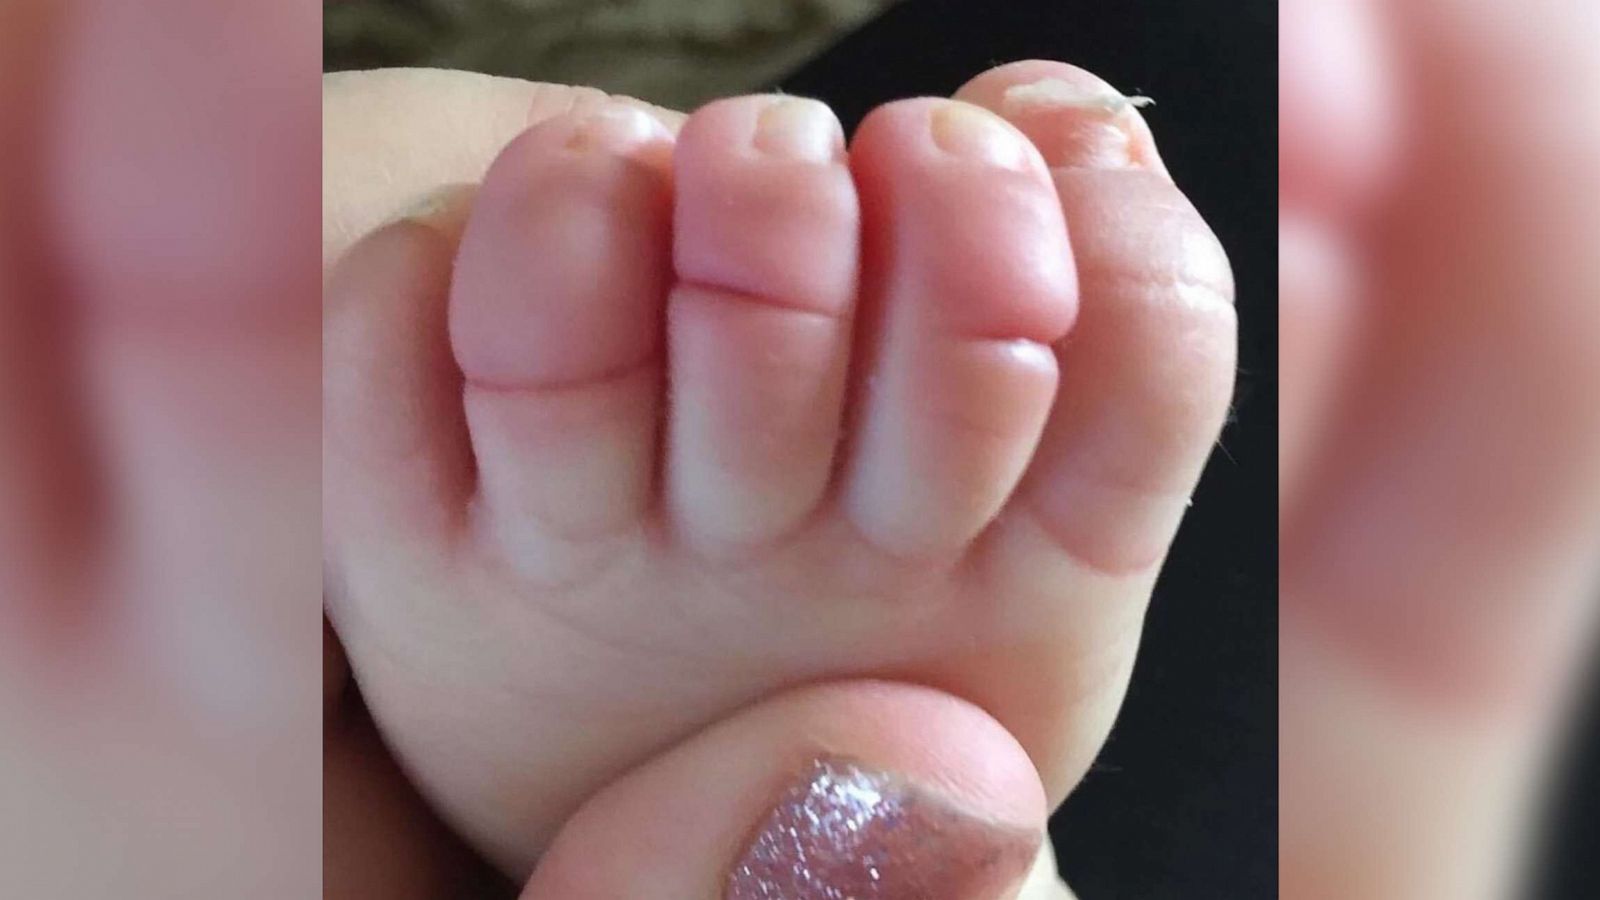 Mom's photo of baby's swollen foot sparks awareness about rare condition -  Good Morning America